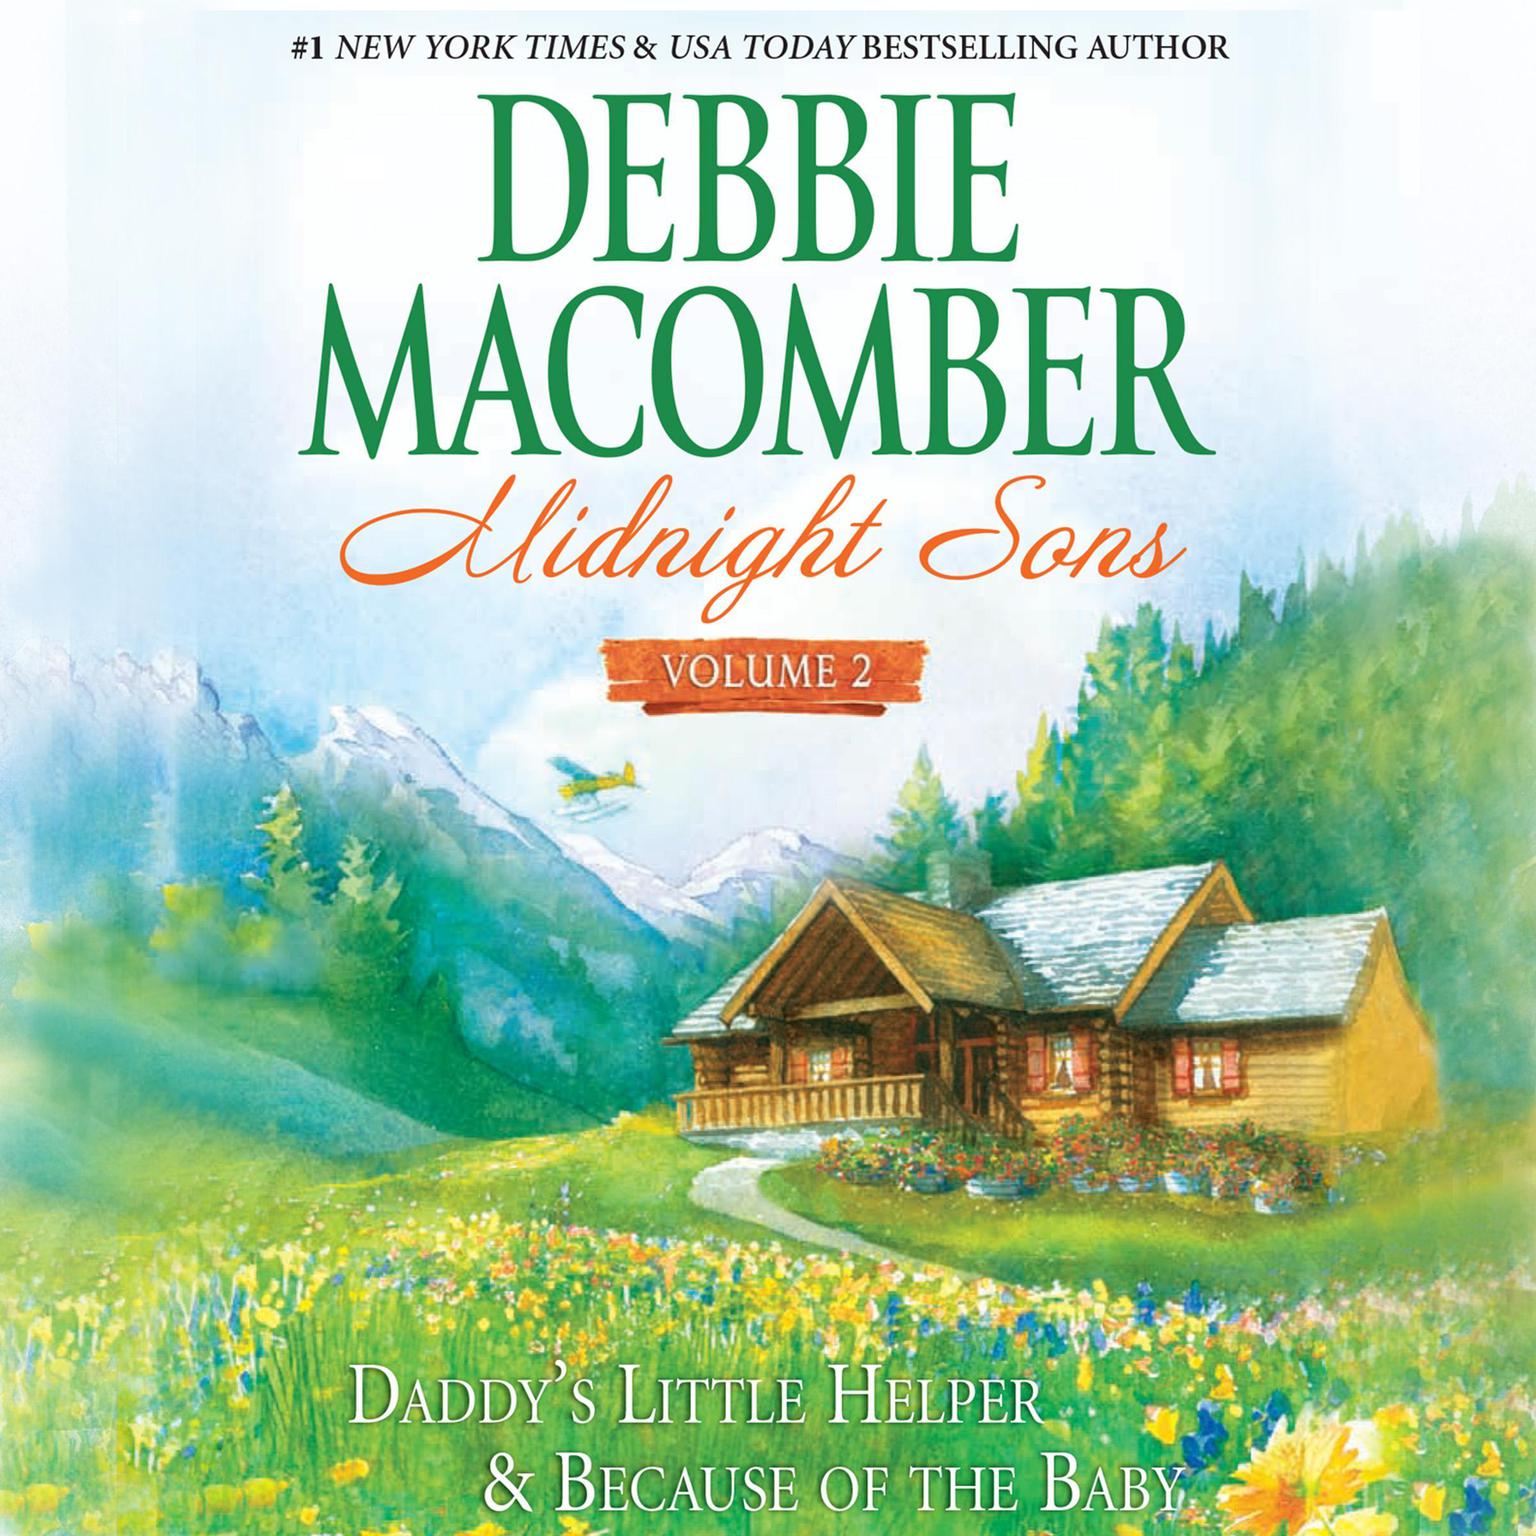 Midnight Sons Volume 2: Daddys Little Helper & Because of the Baby Audiobook, by Debbie Macomber